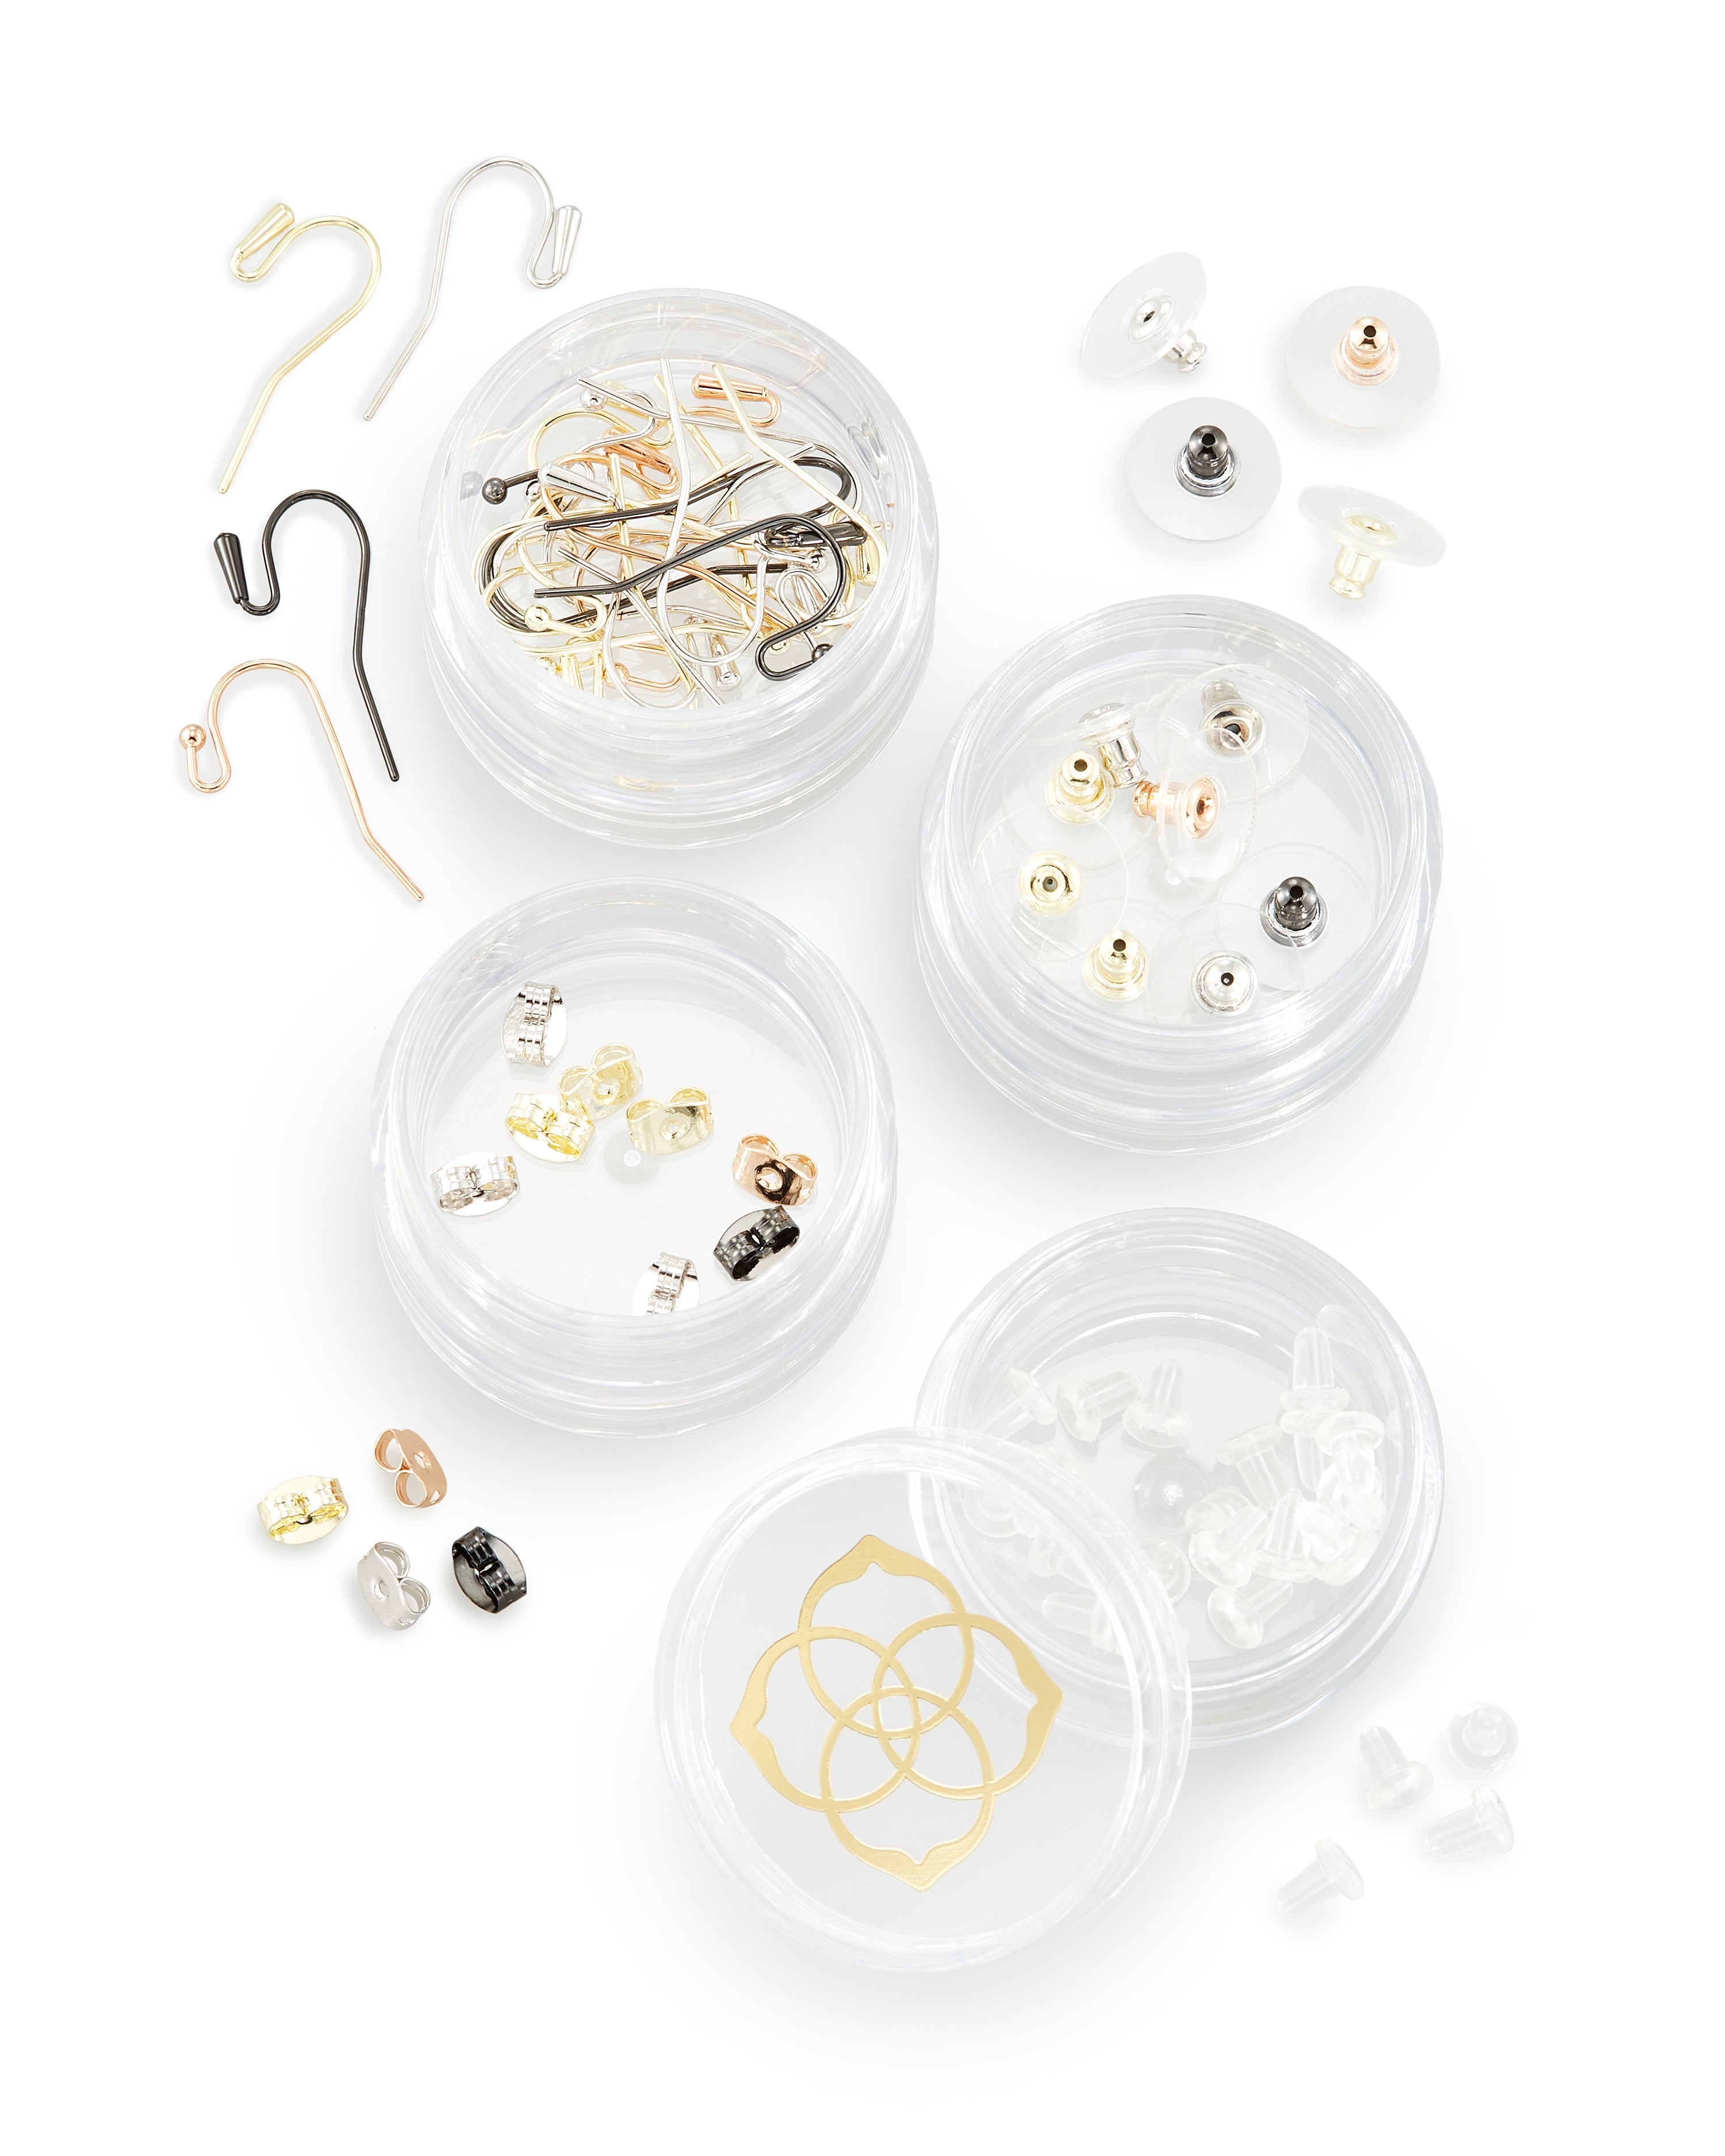 Kendra Scott 'The Essentials' Earring Supply Kit - 36 Pieces